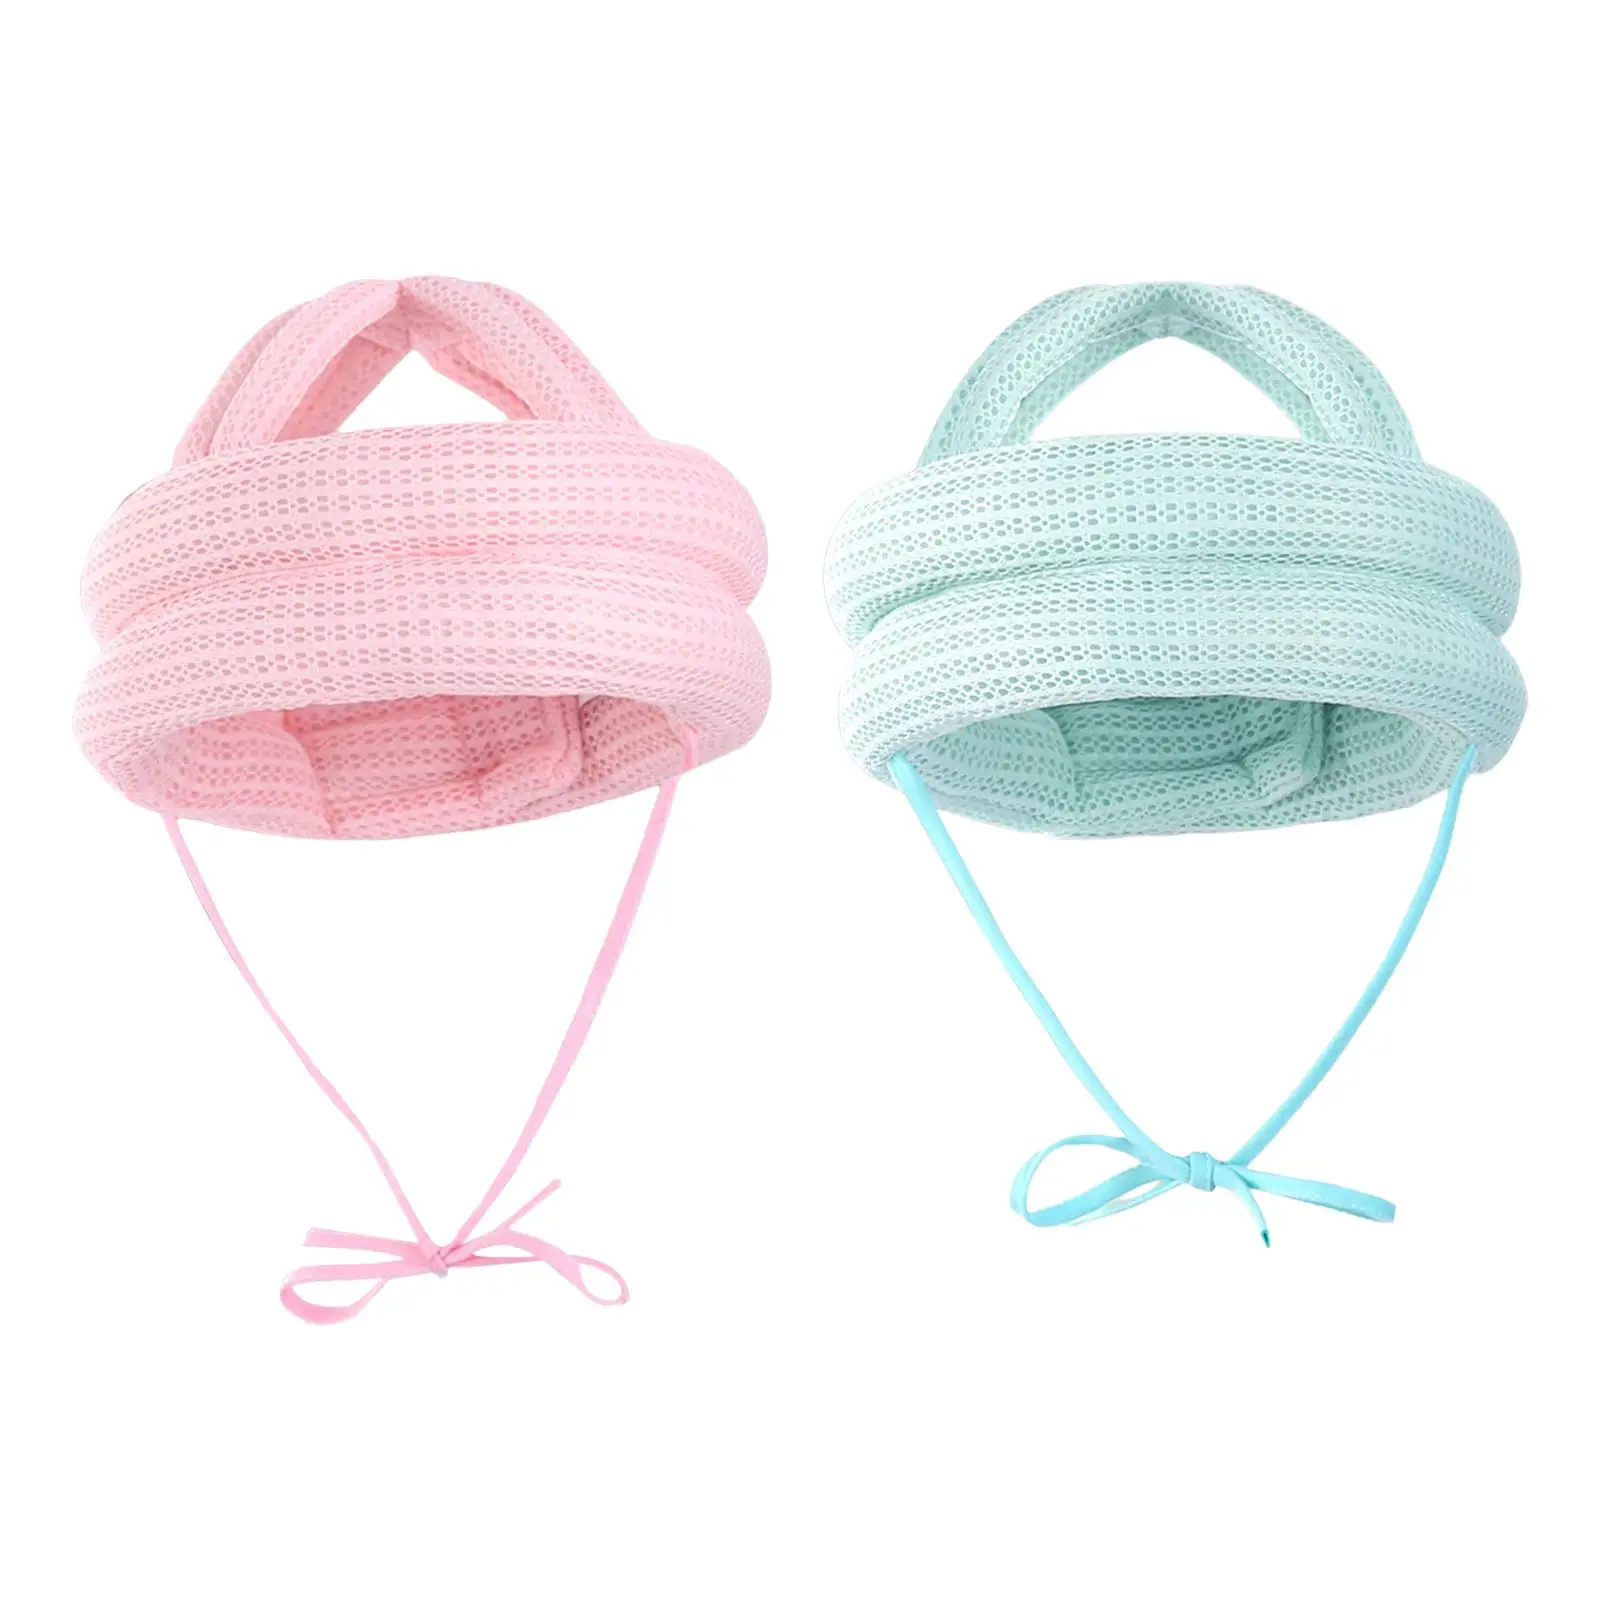 Infant Head Protective Hat Protective Harnesses Cap for 0-5 Years Old